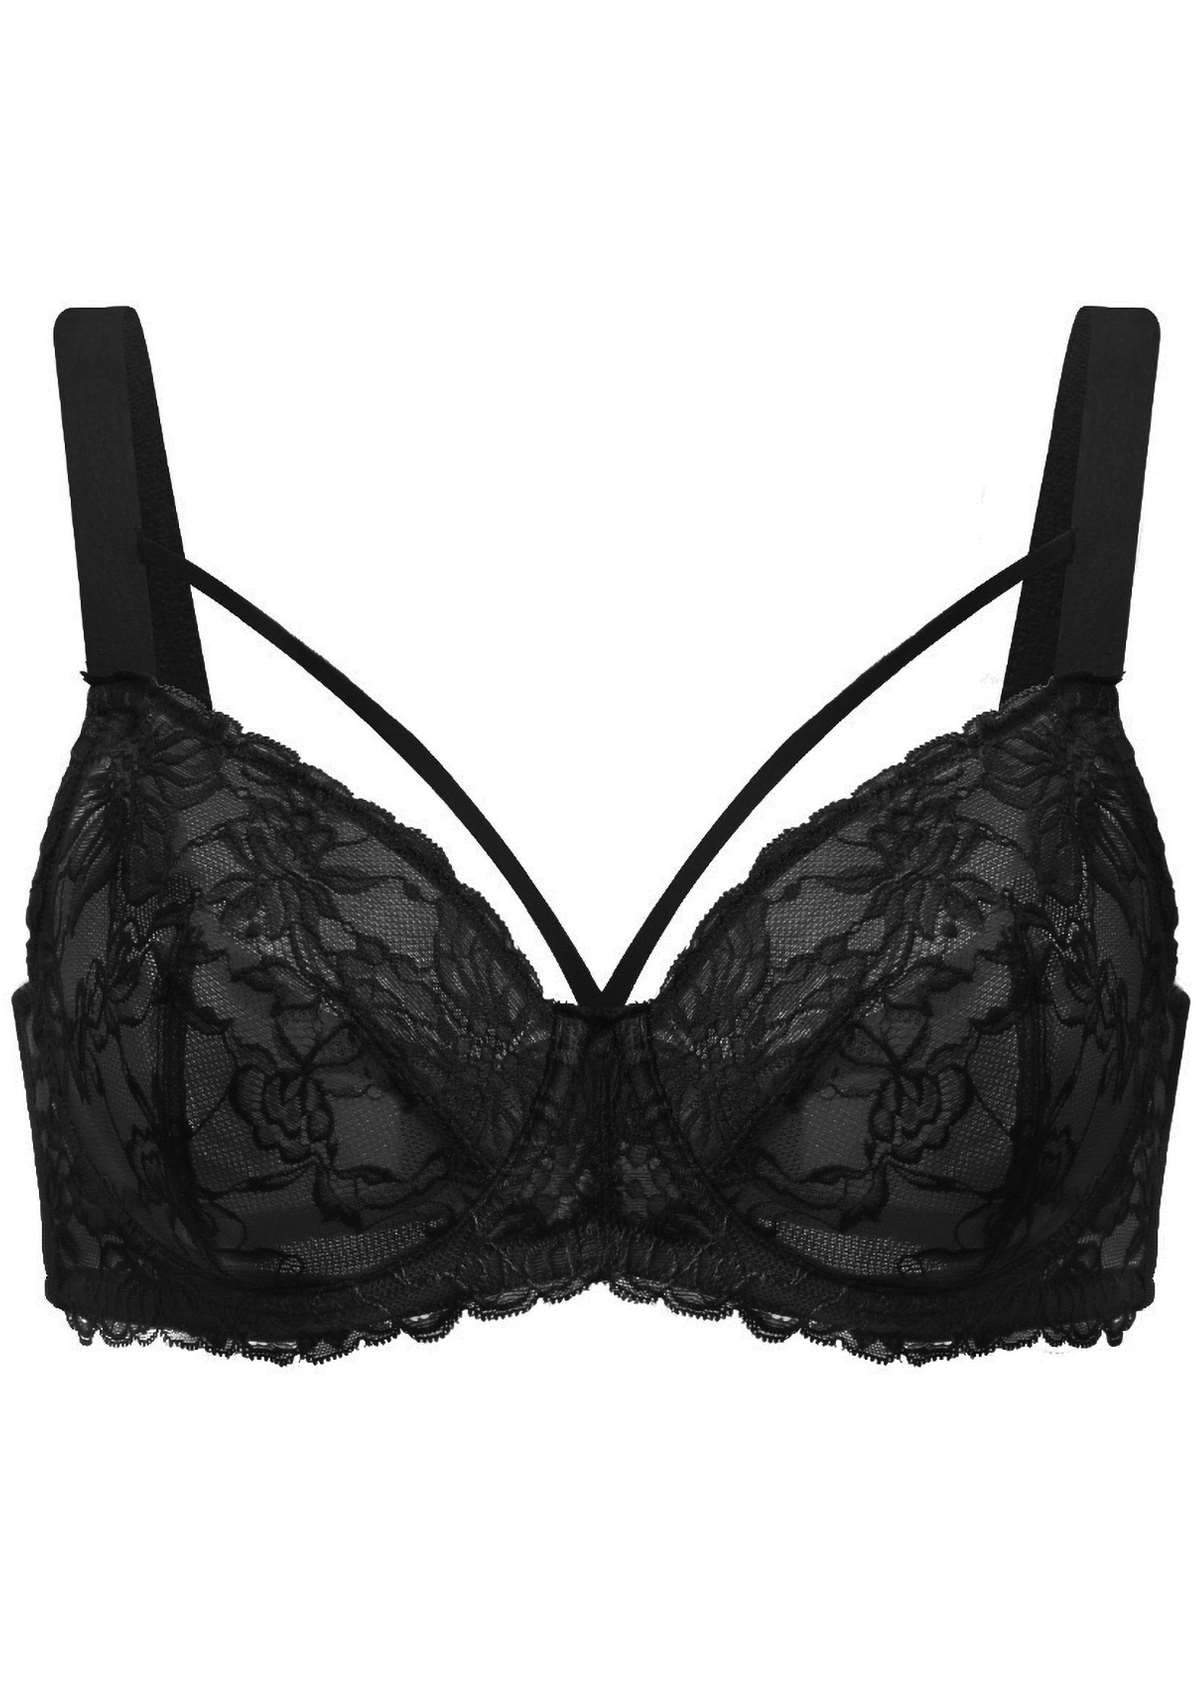 HSIA Pretty In Petals Bra - Plus Size Lingerie For Comfrot And Support - Black / 32 / D